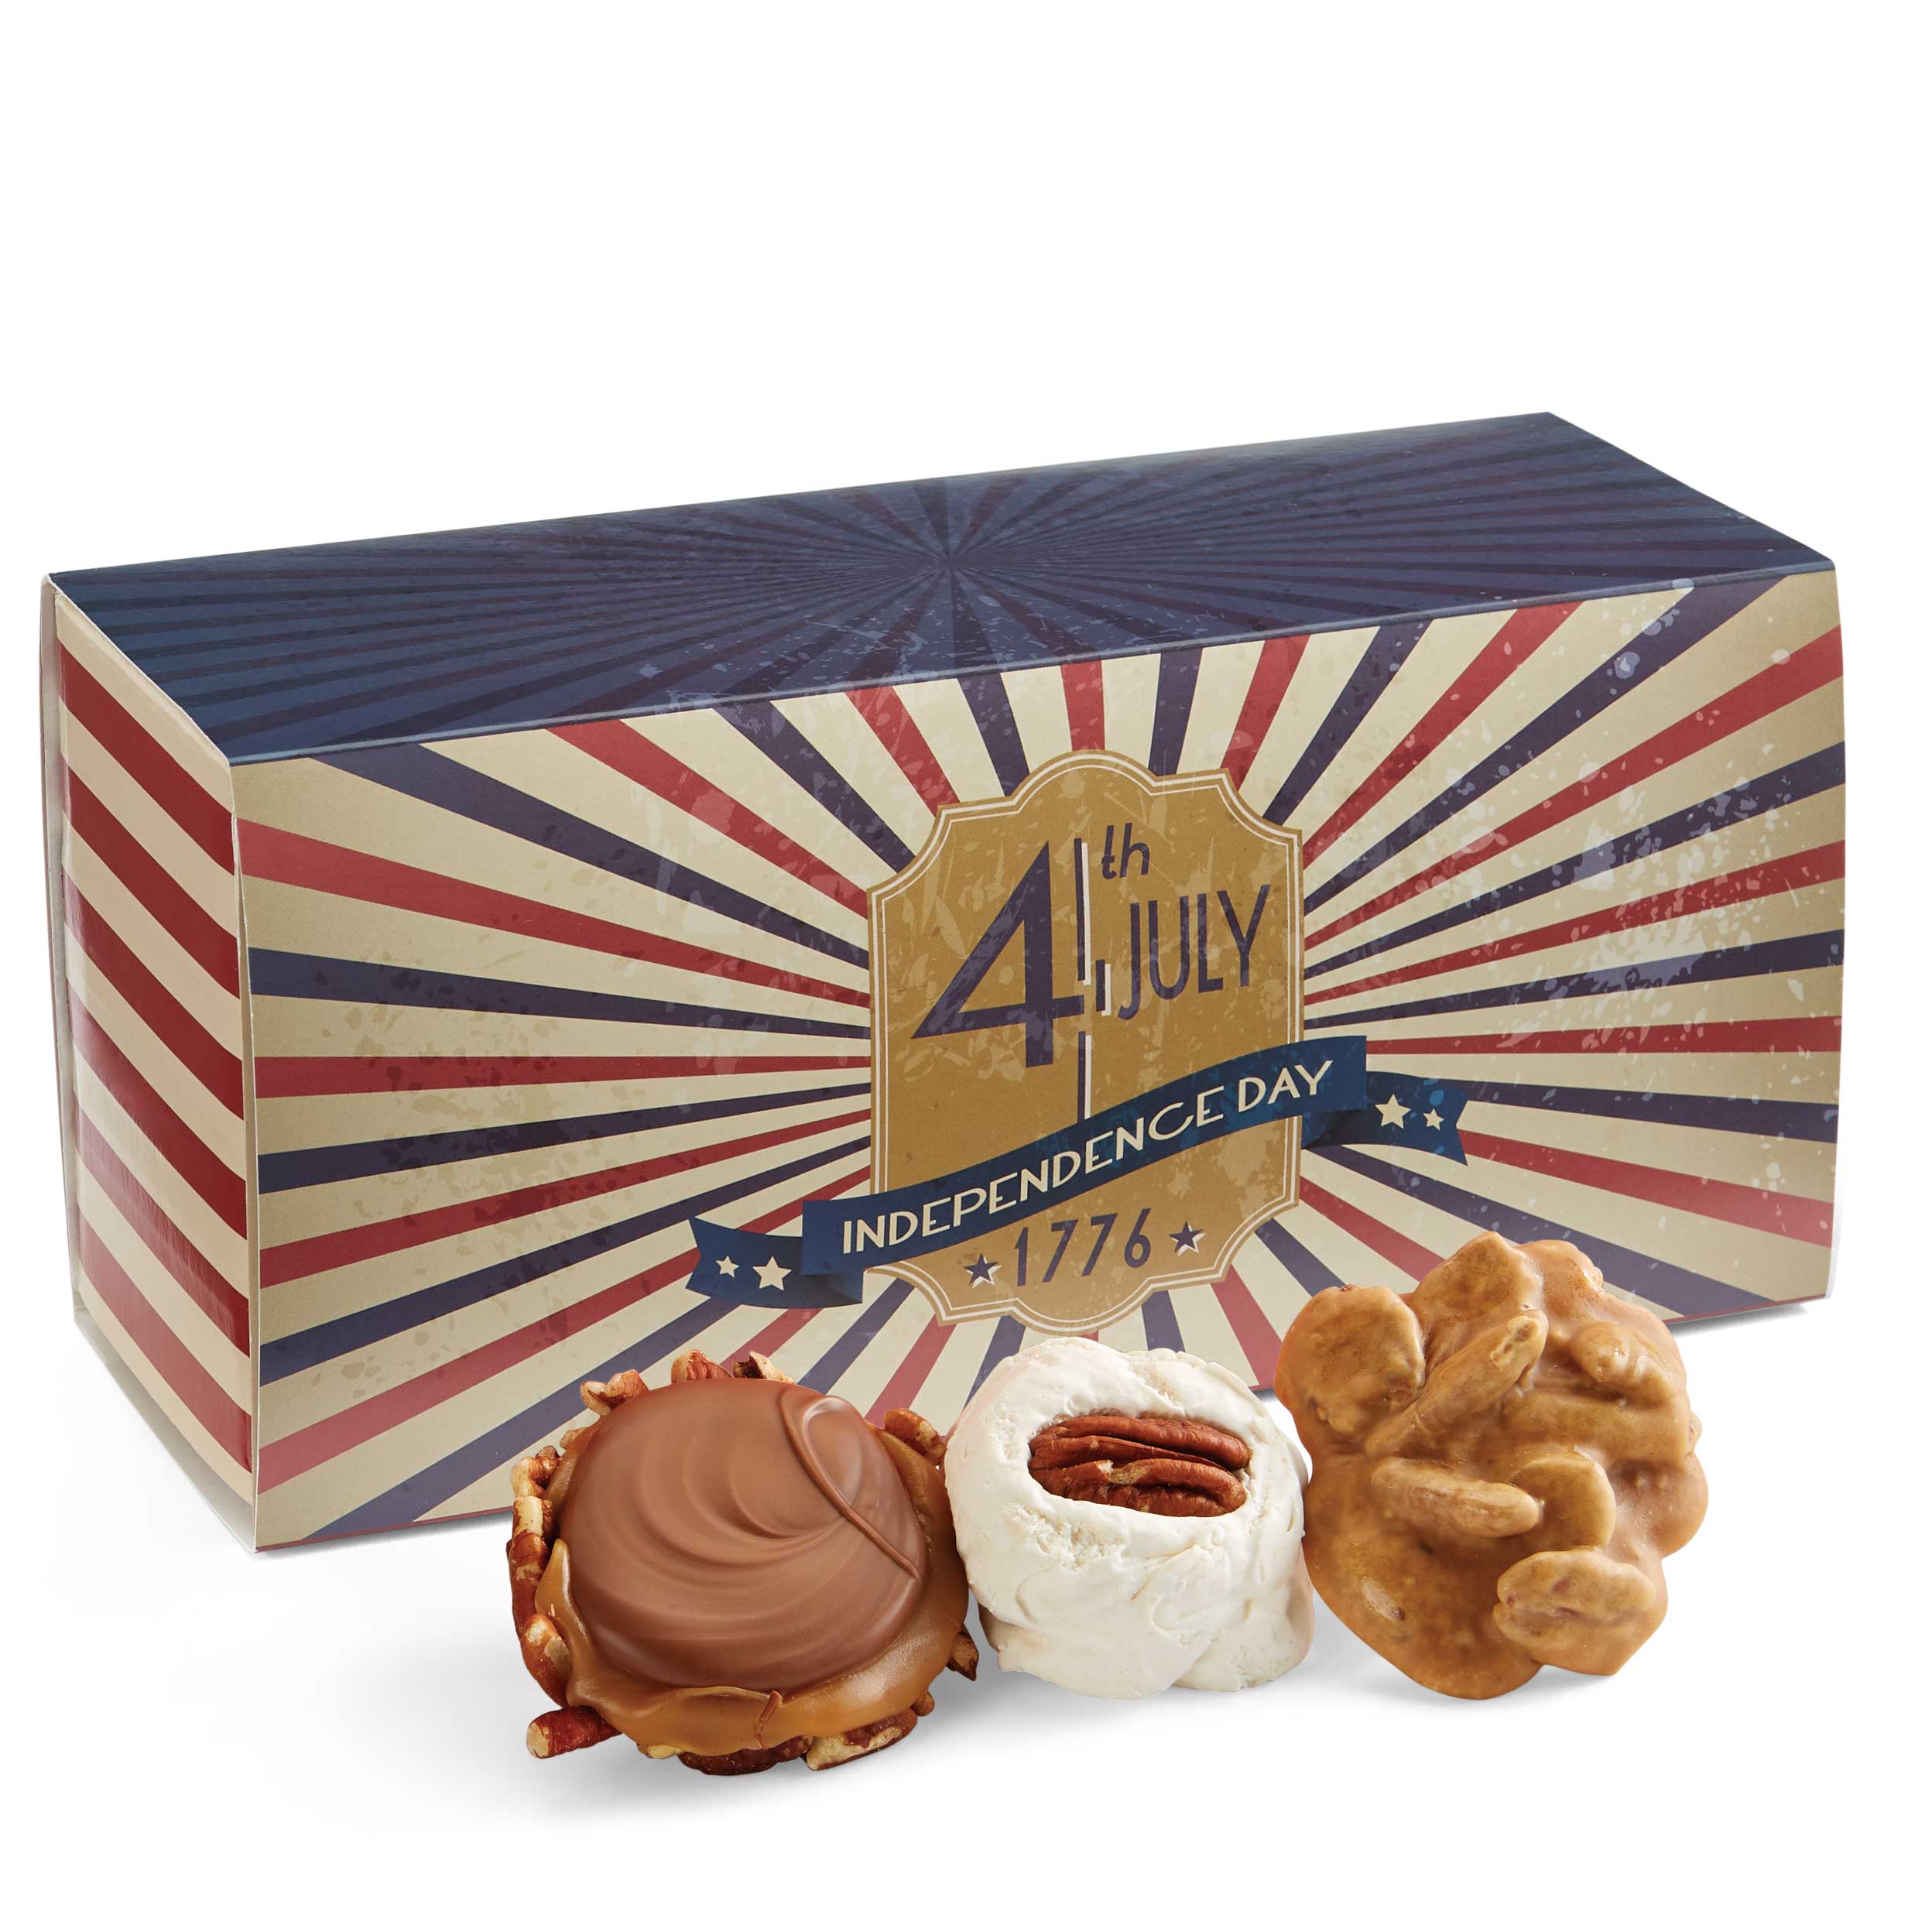 Product Image for 12 Piece Best Sellers Trio in the 4th of July Gift Box